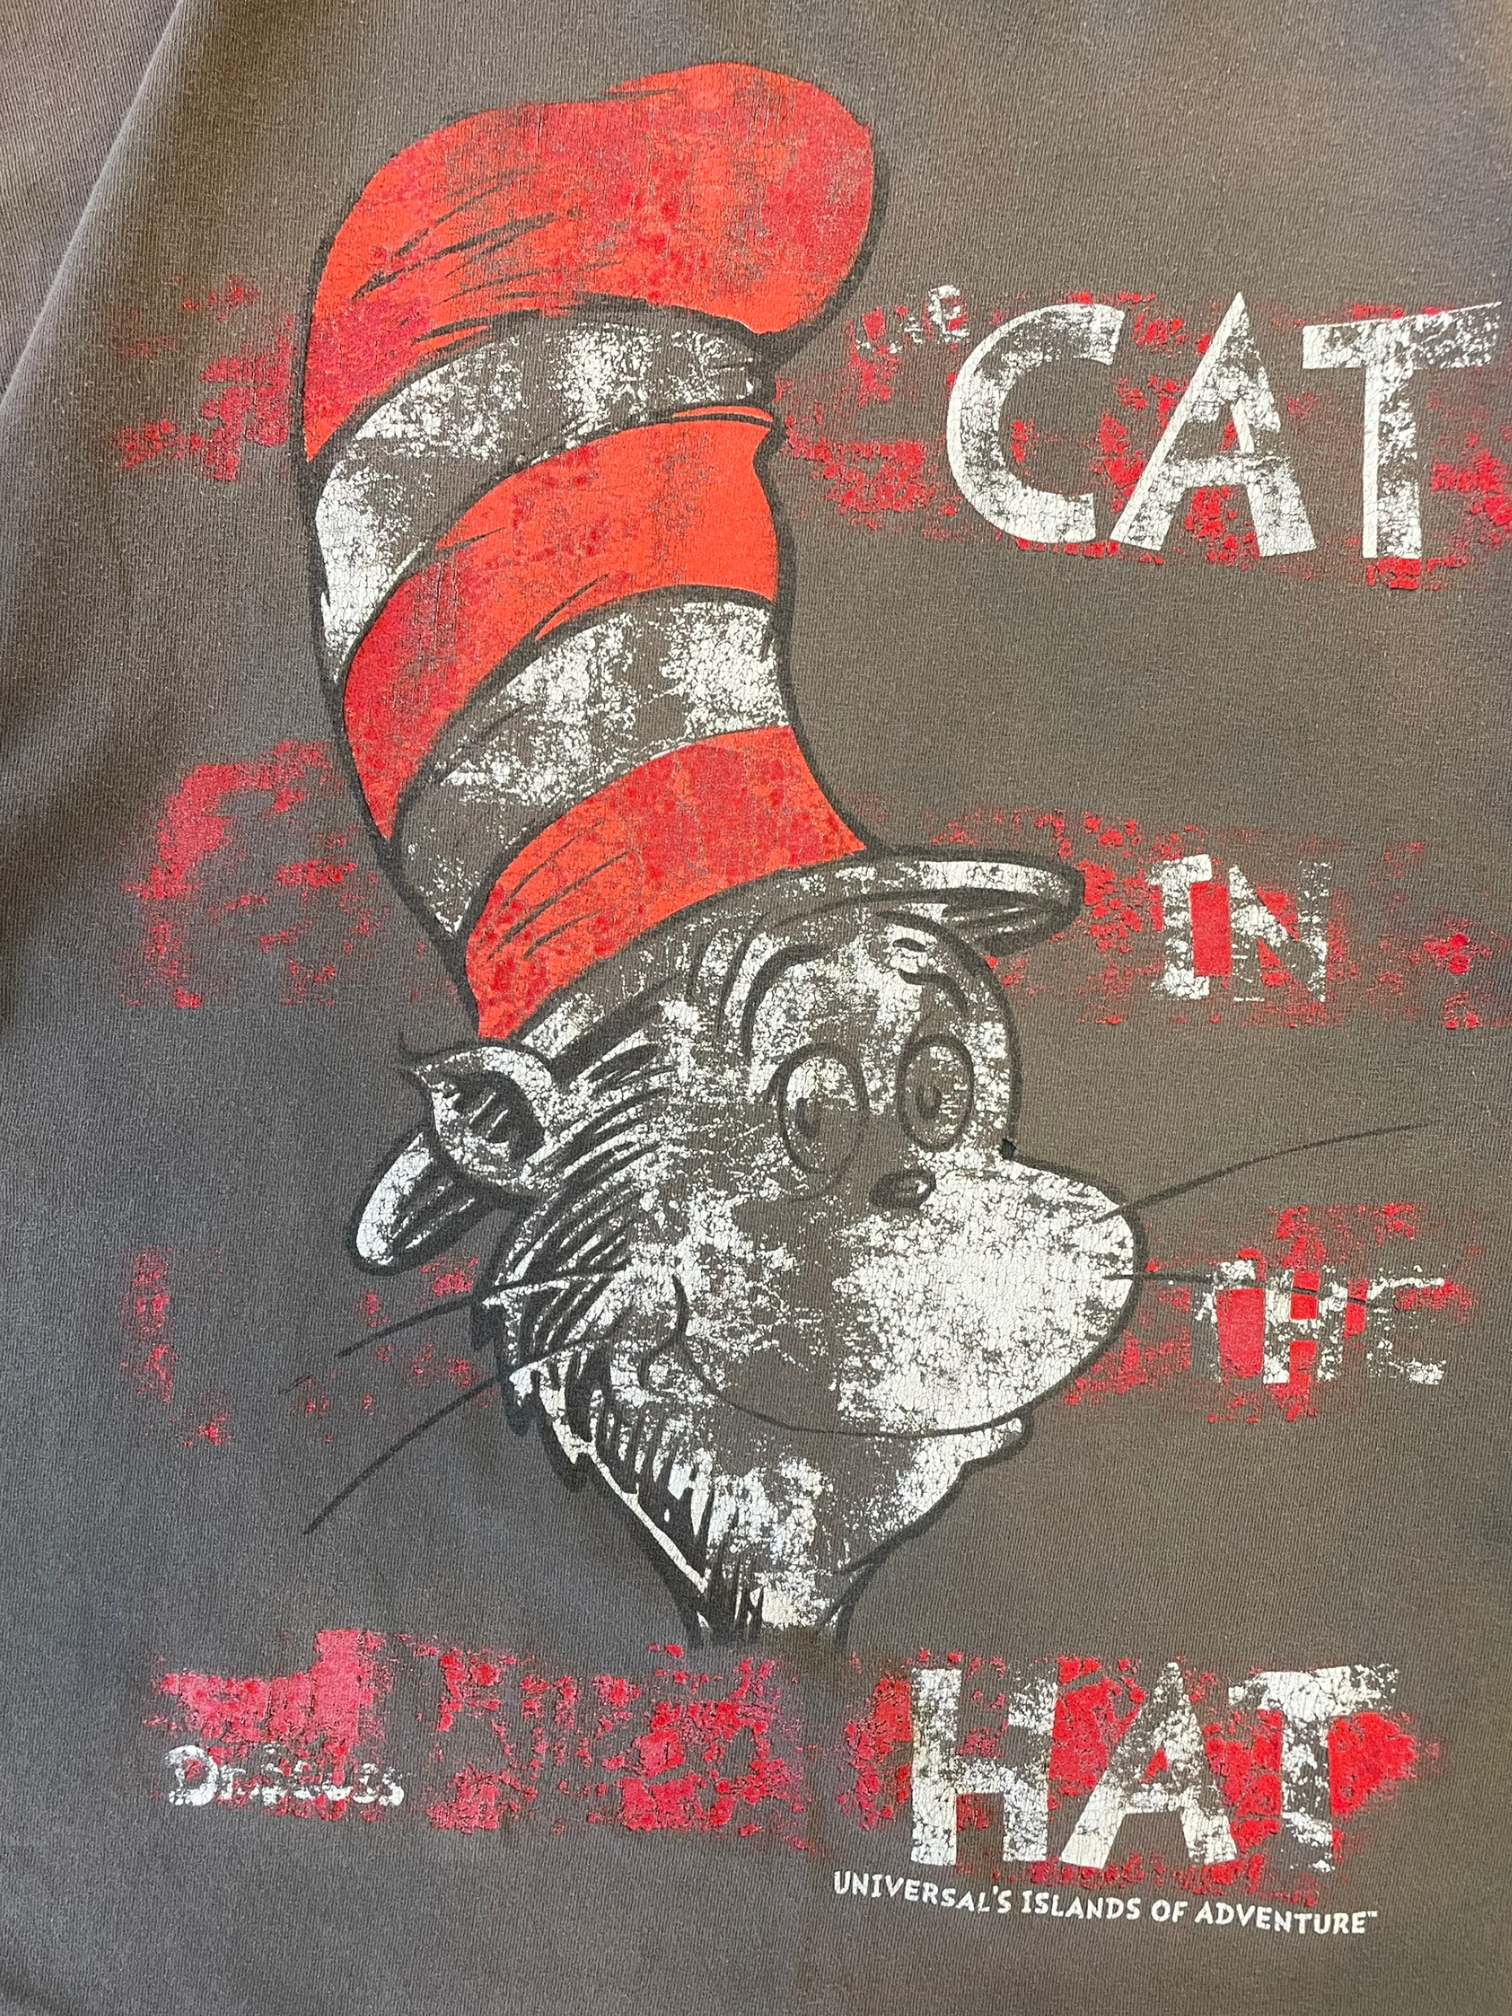 90s Cat in The Hat T-Shirt - Large